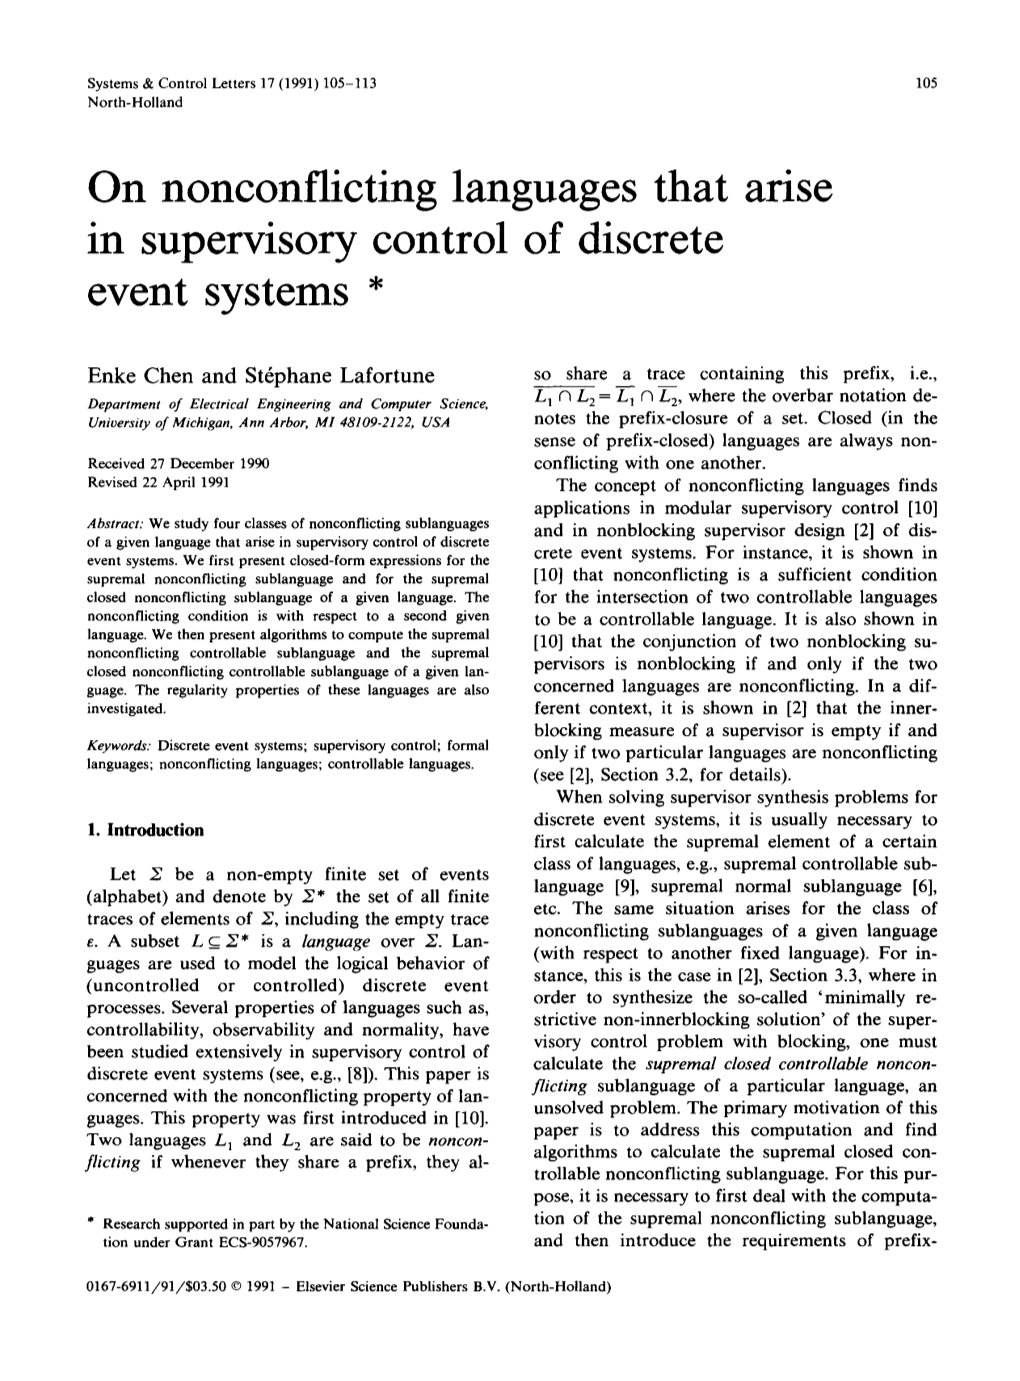 On Nonconflicting Languages That Arise in Supervisory Control of Discrete Event Systems *